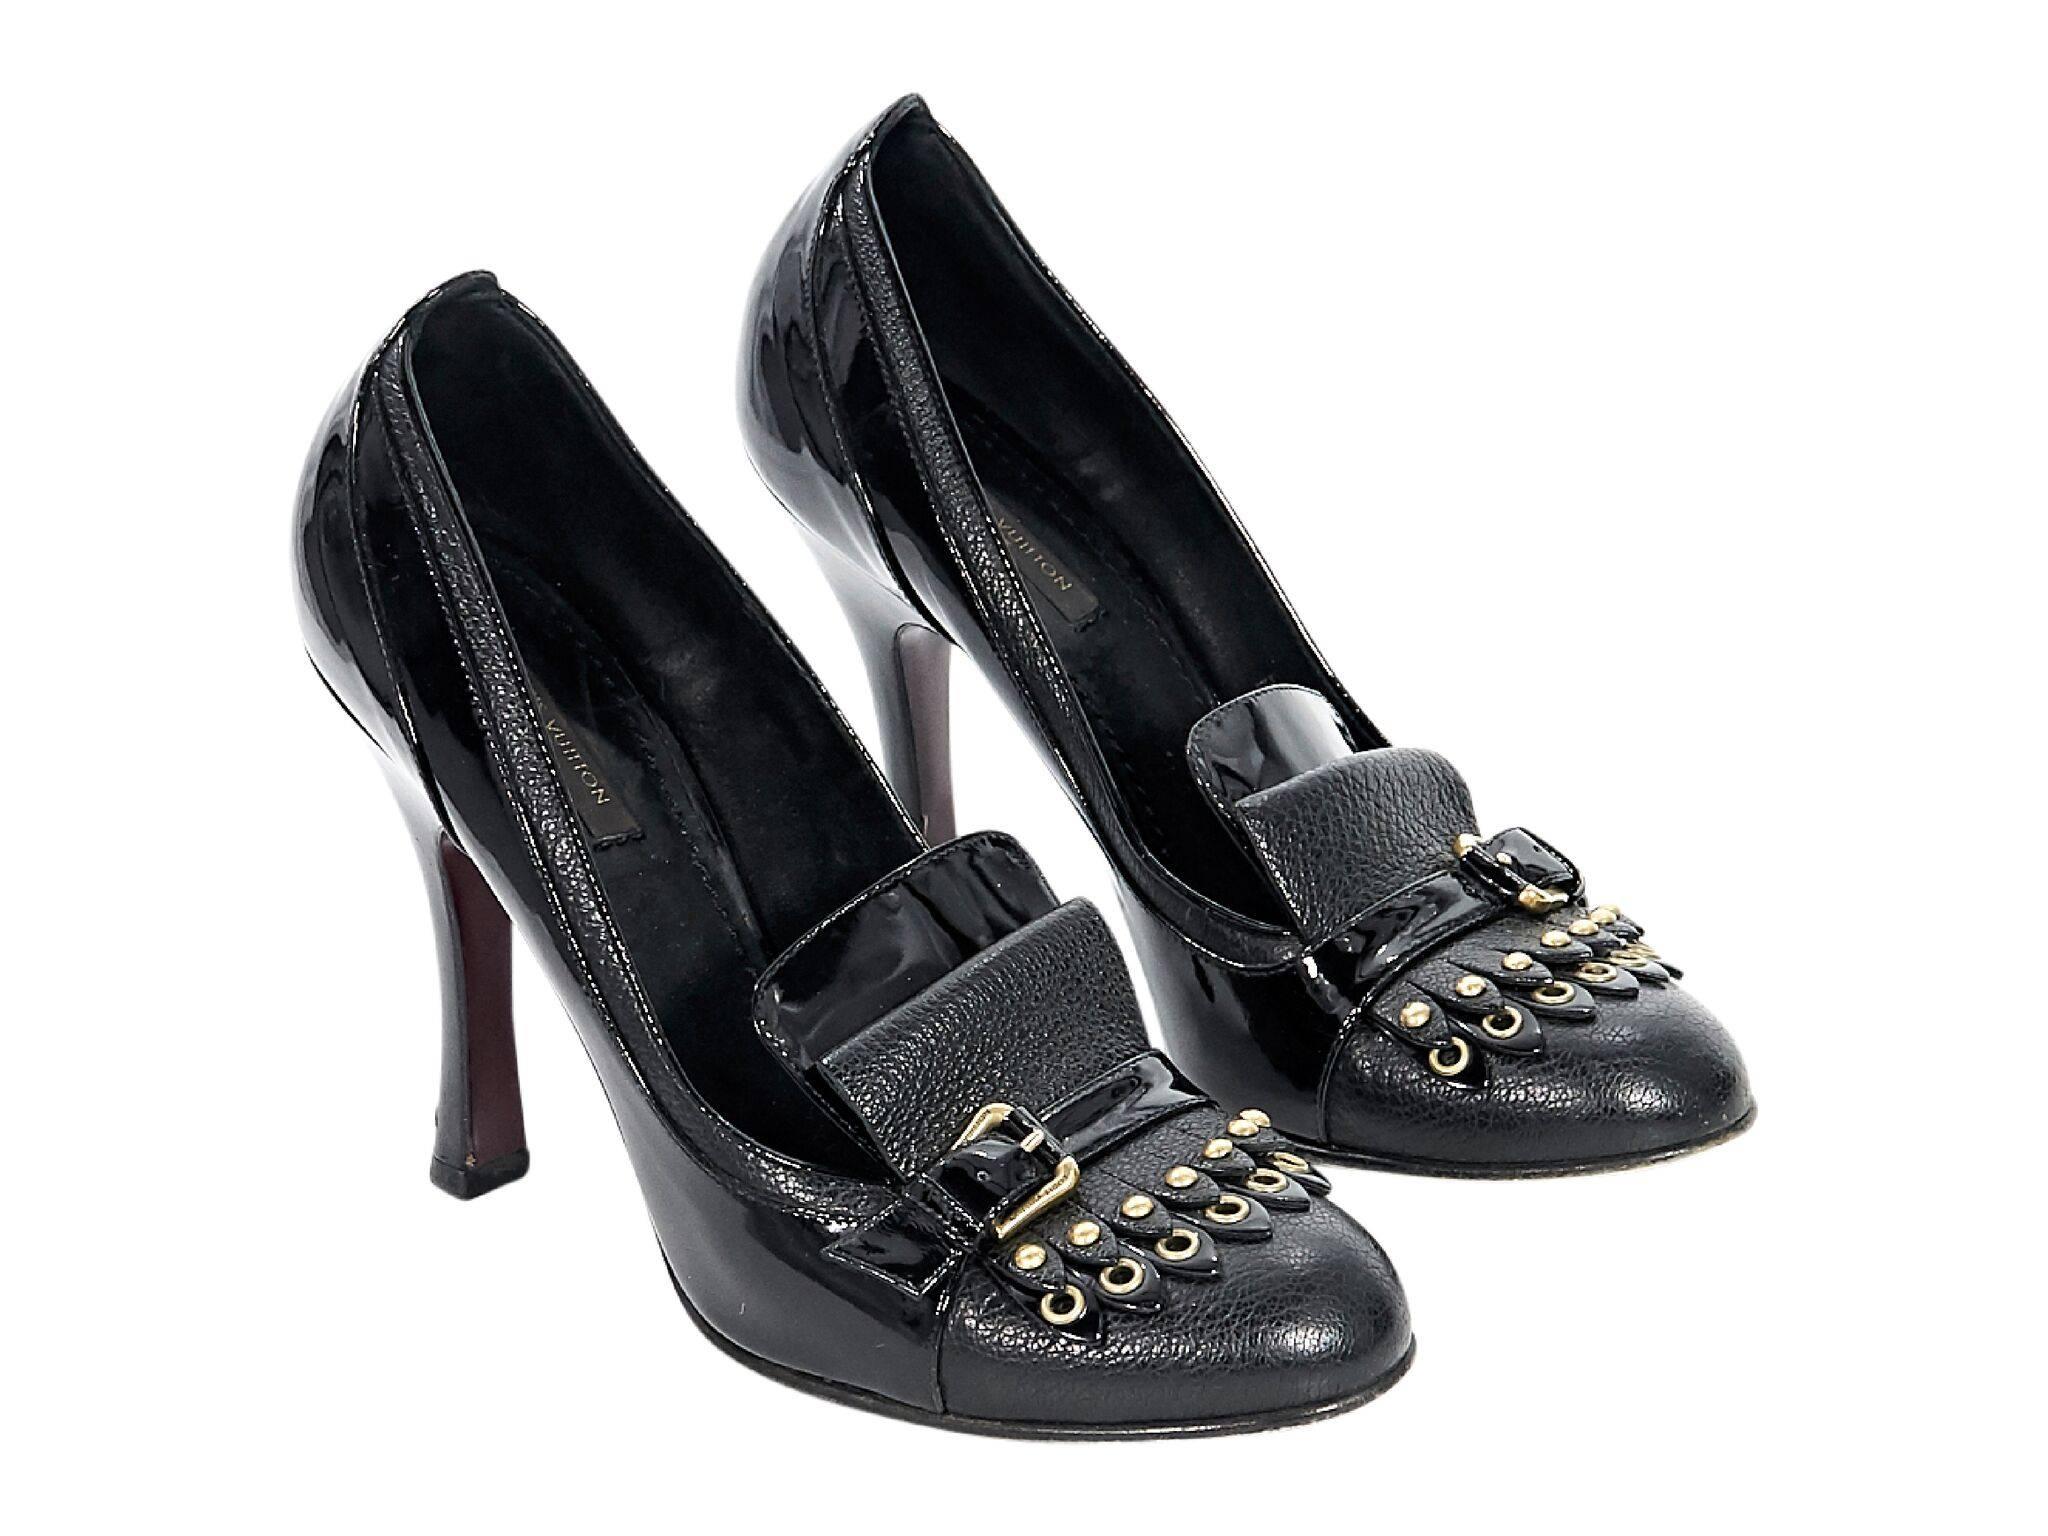 Product details:  Black patent leather heeled ghillie loafer pumps by Louis Vuitton.  Ghillie fringe at vamp accented with studs. Round toe.  Slip-on style.  Goldtone hardware. 
Condition: Pre-owned. Very good. 
Est. Retail $825 